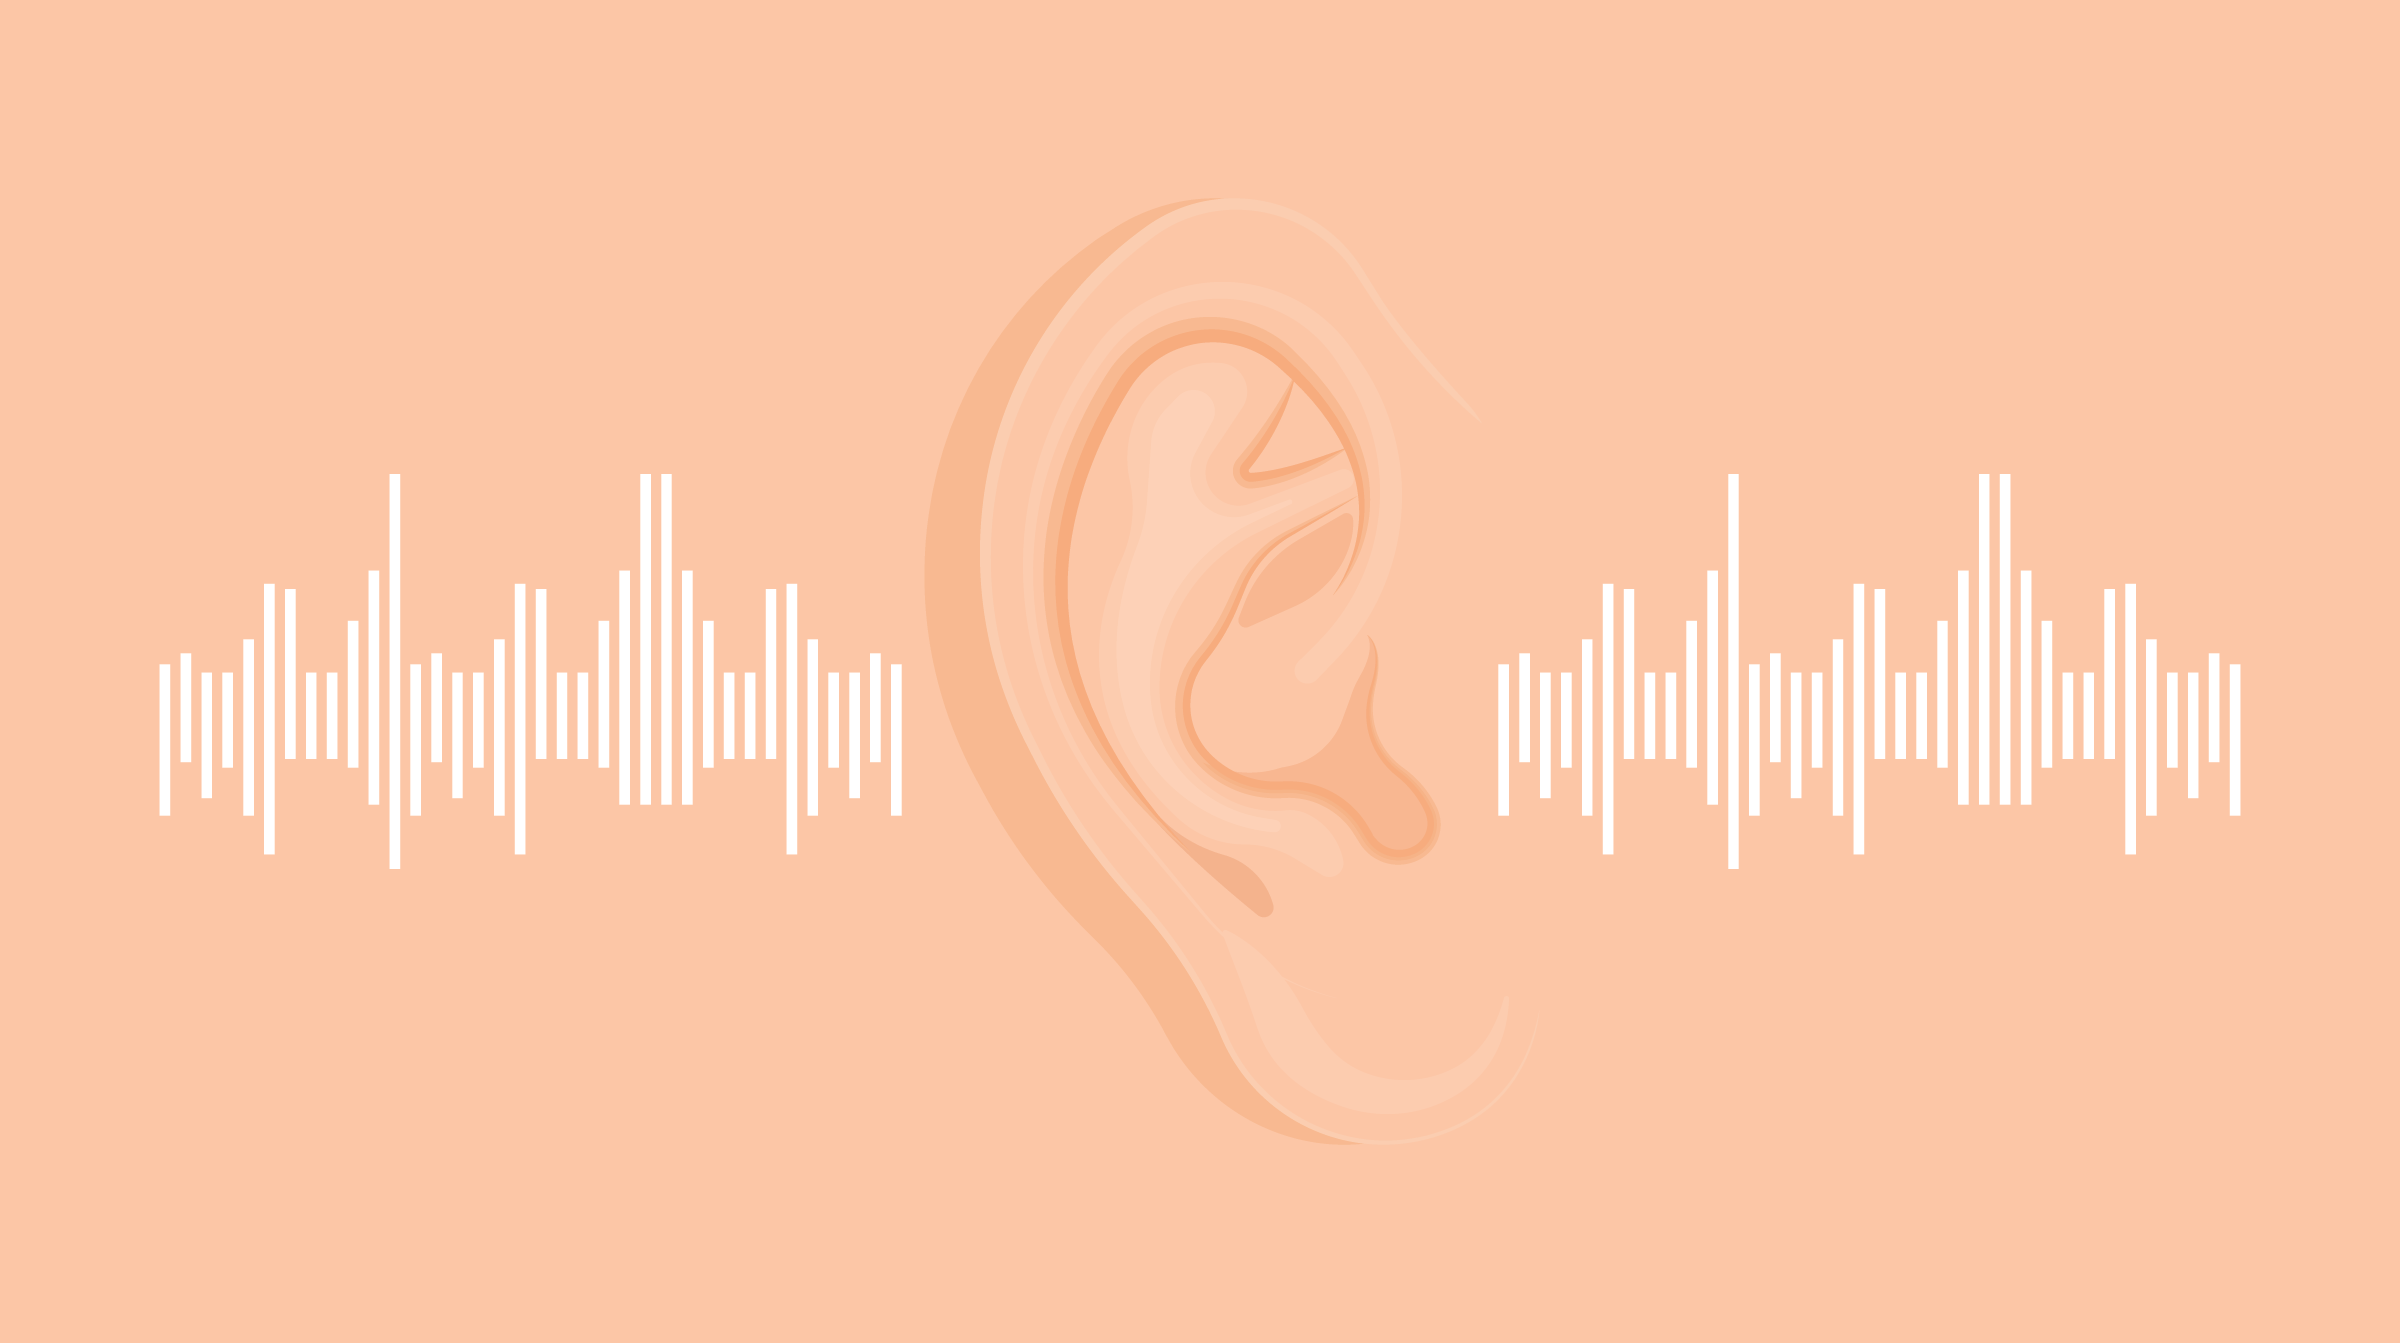 Illustration of ear with sound bars on left and right